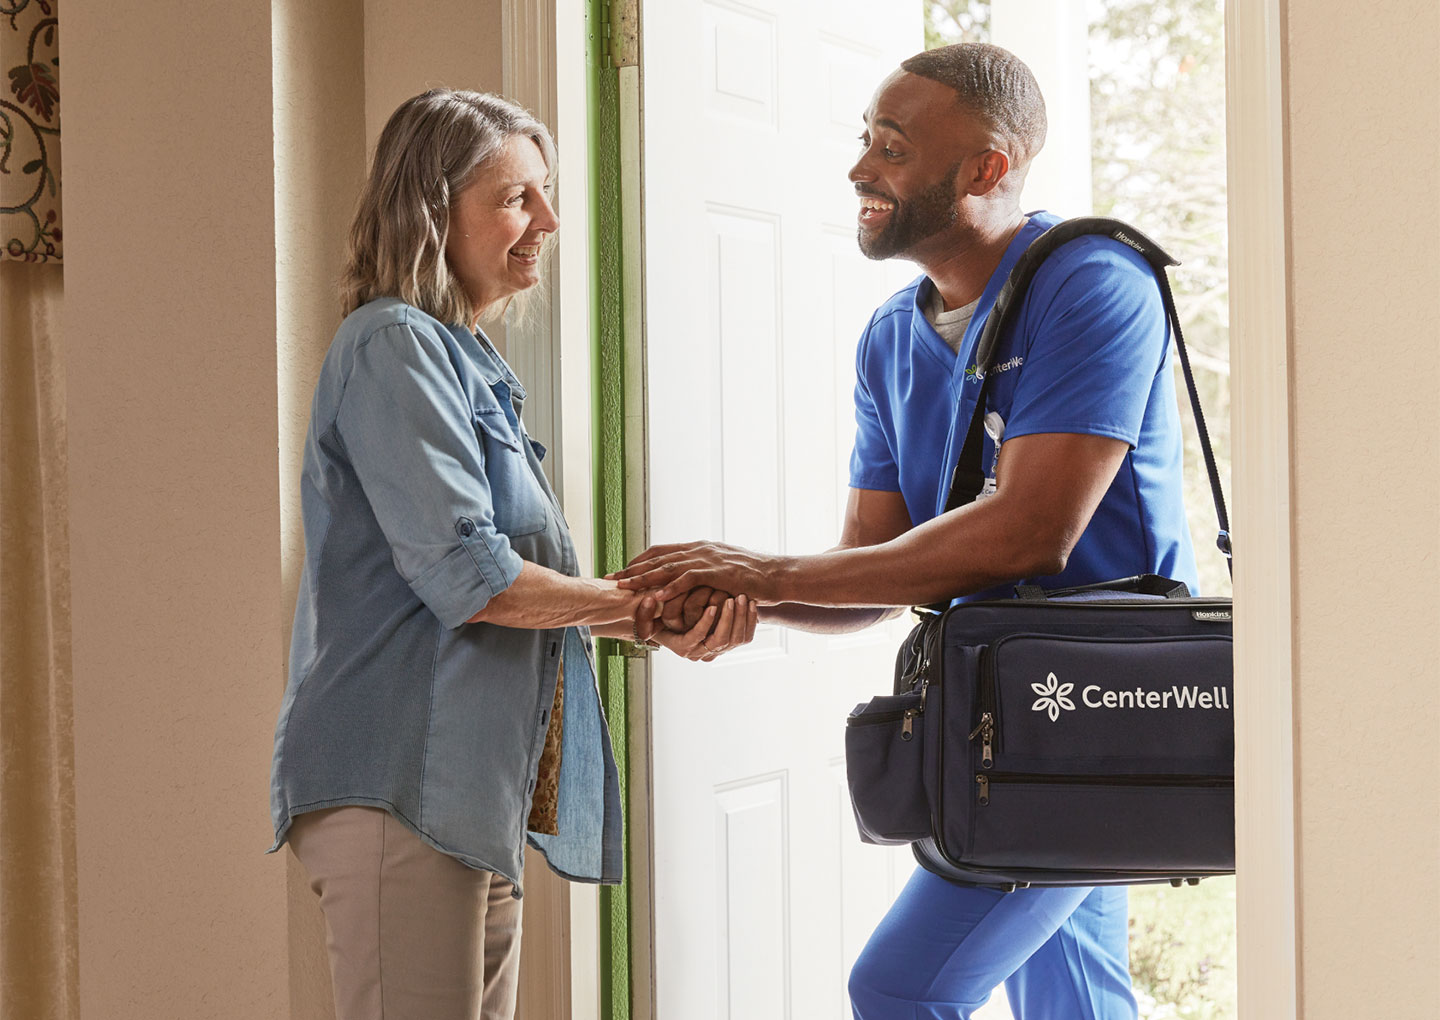 A CenterWell Home Health clinician warmly greeting a patient as he arrives at her home